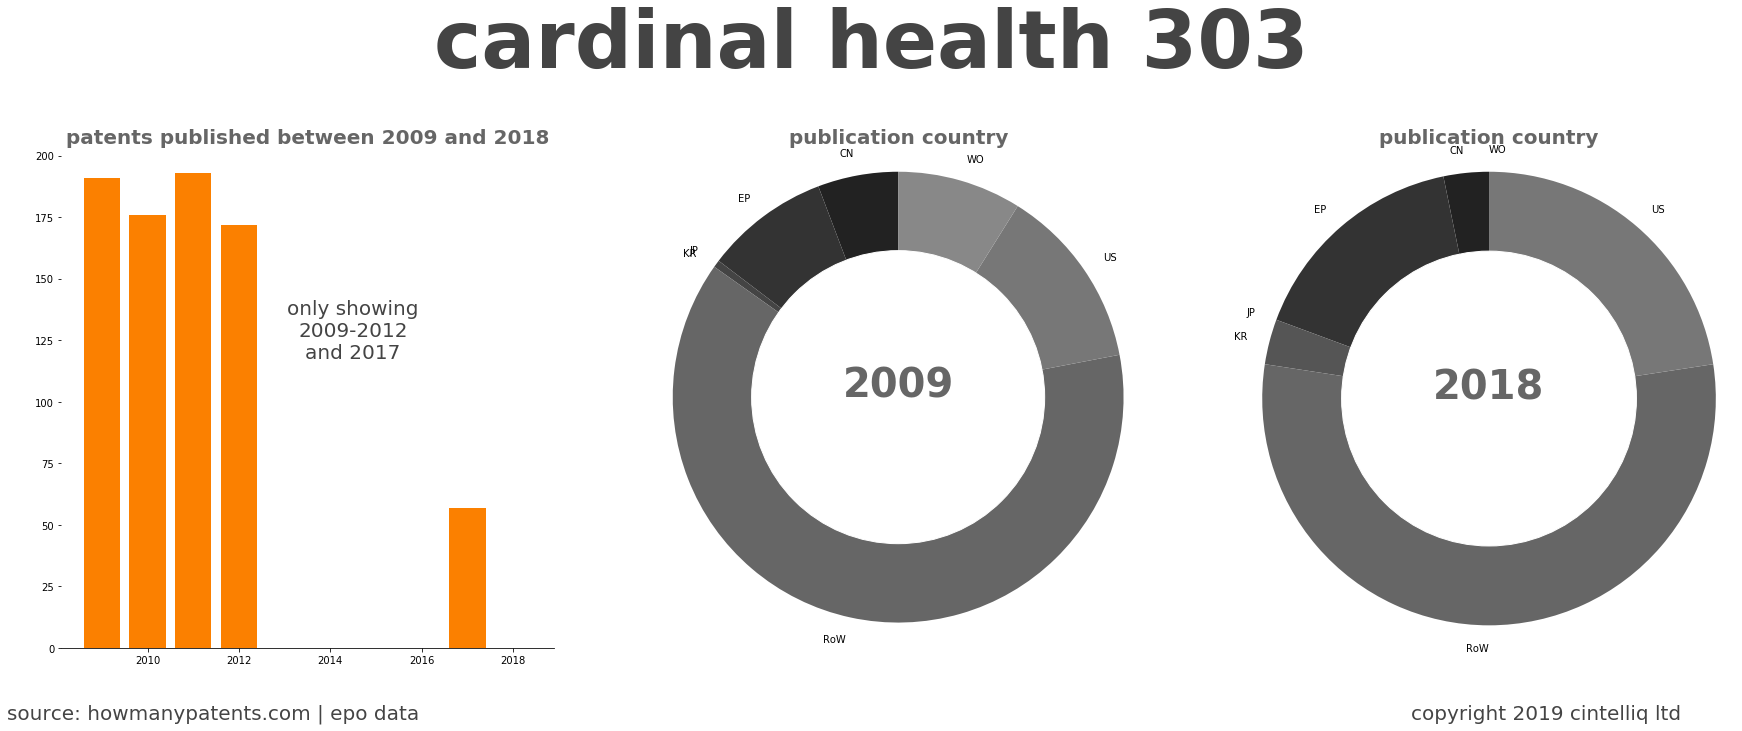 summary of patents for Cardinal Health 303